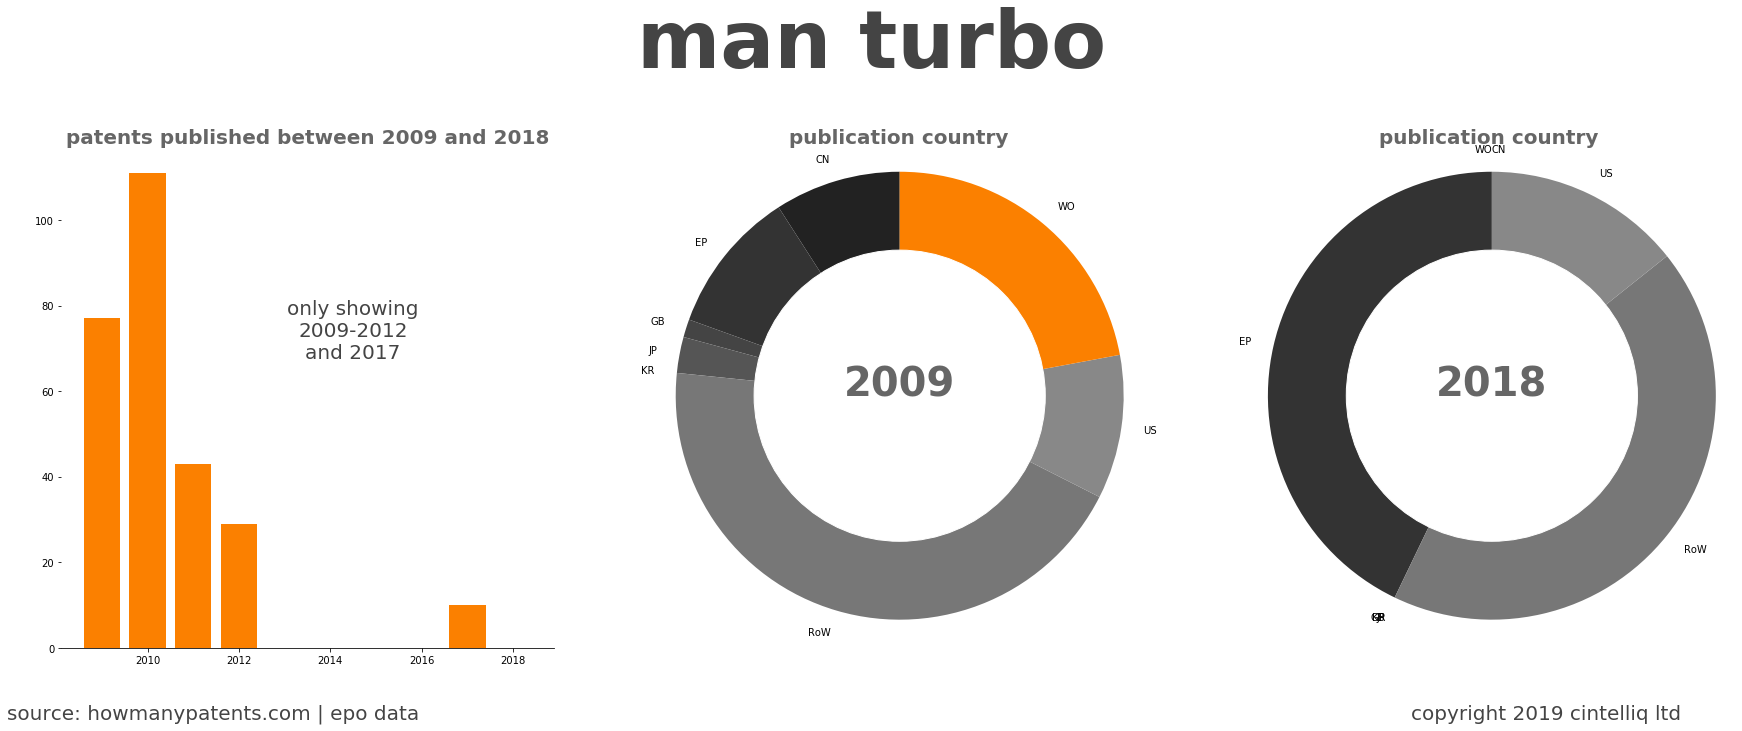 summary of patents for Man Turbo